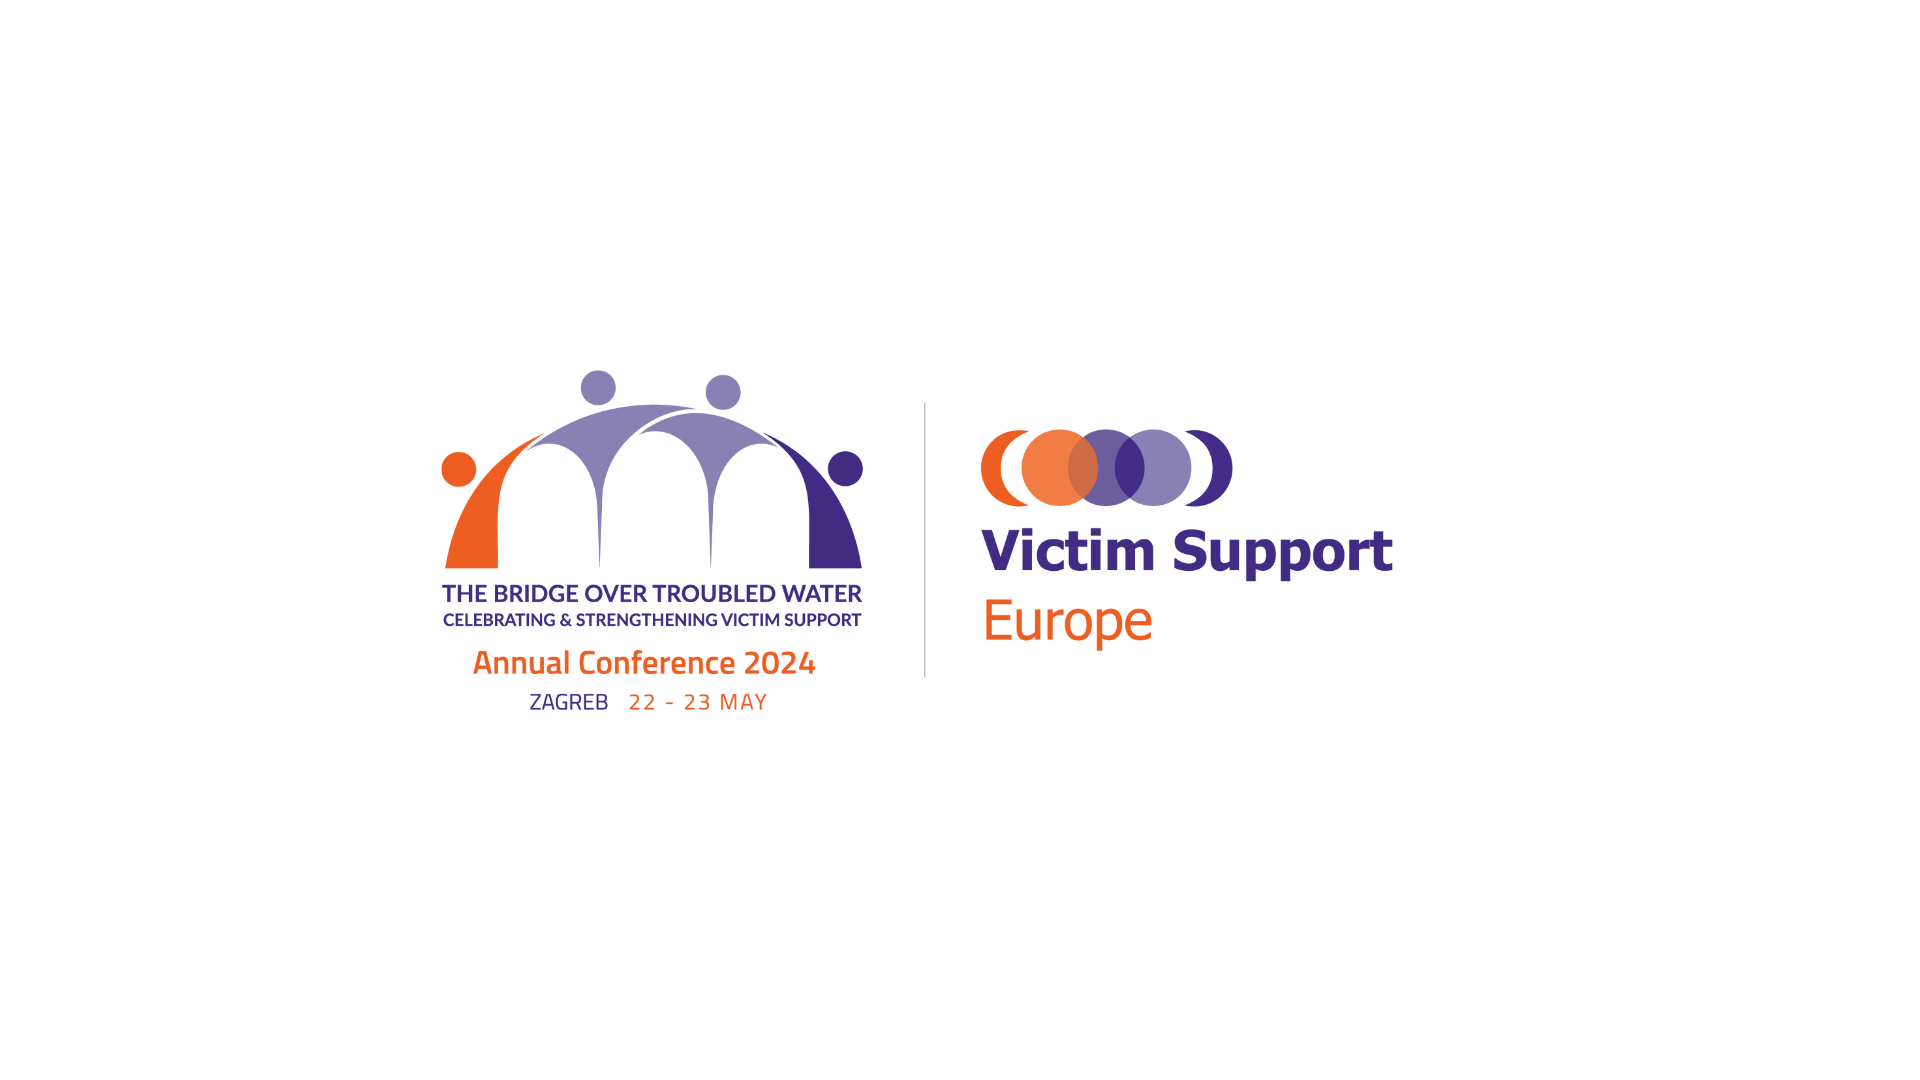 Victim Support Europe 2024 Annual Conference